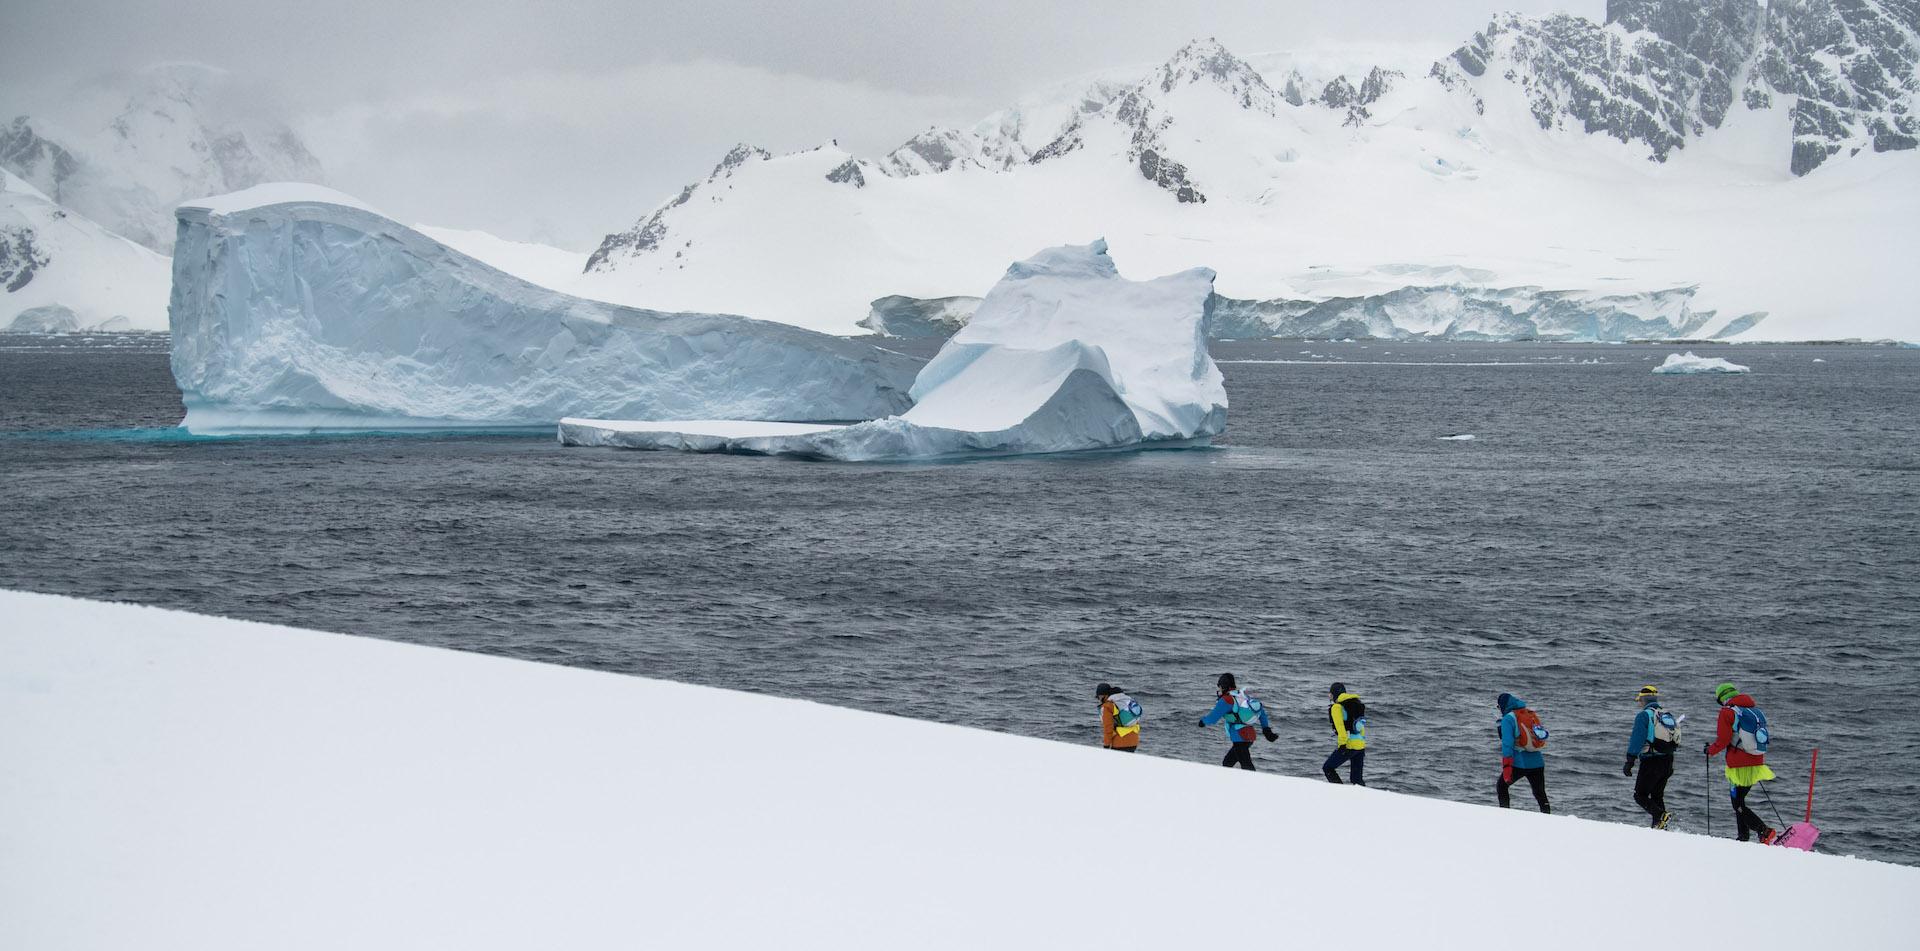 
THE LAST DESERT (ANTARCTICA) ANTARCTICA'S ONLY MULTI-STAGE FOOTRACE
26 November 2024
